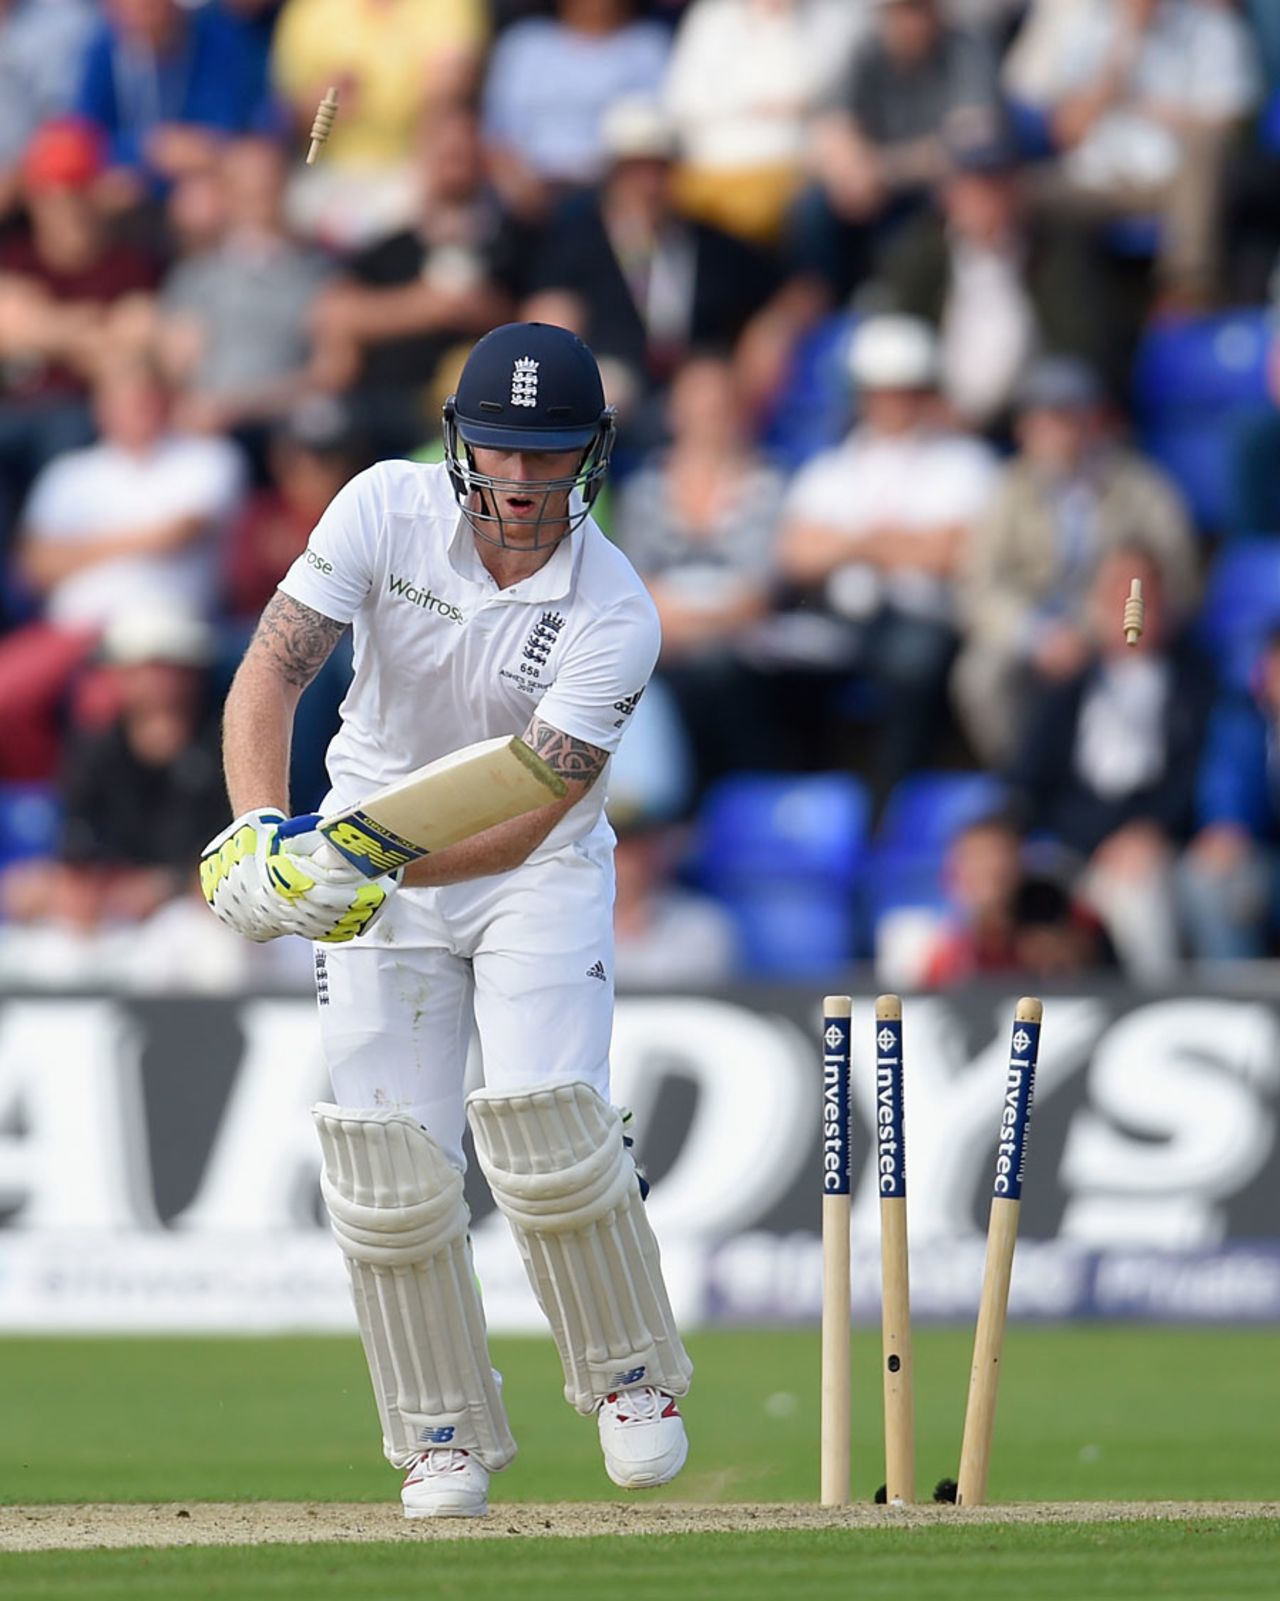 Ben Stokes was cleaned up by Mitchell Starc, England v Australia, 1st Investec Ashes Test, Cardiff, 1st day, July 8, 2015